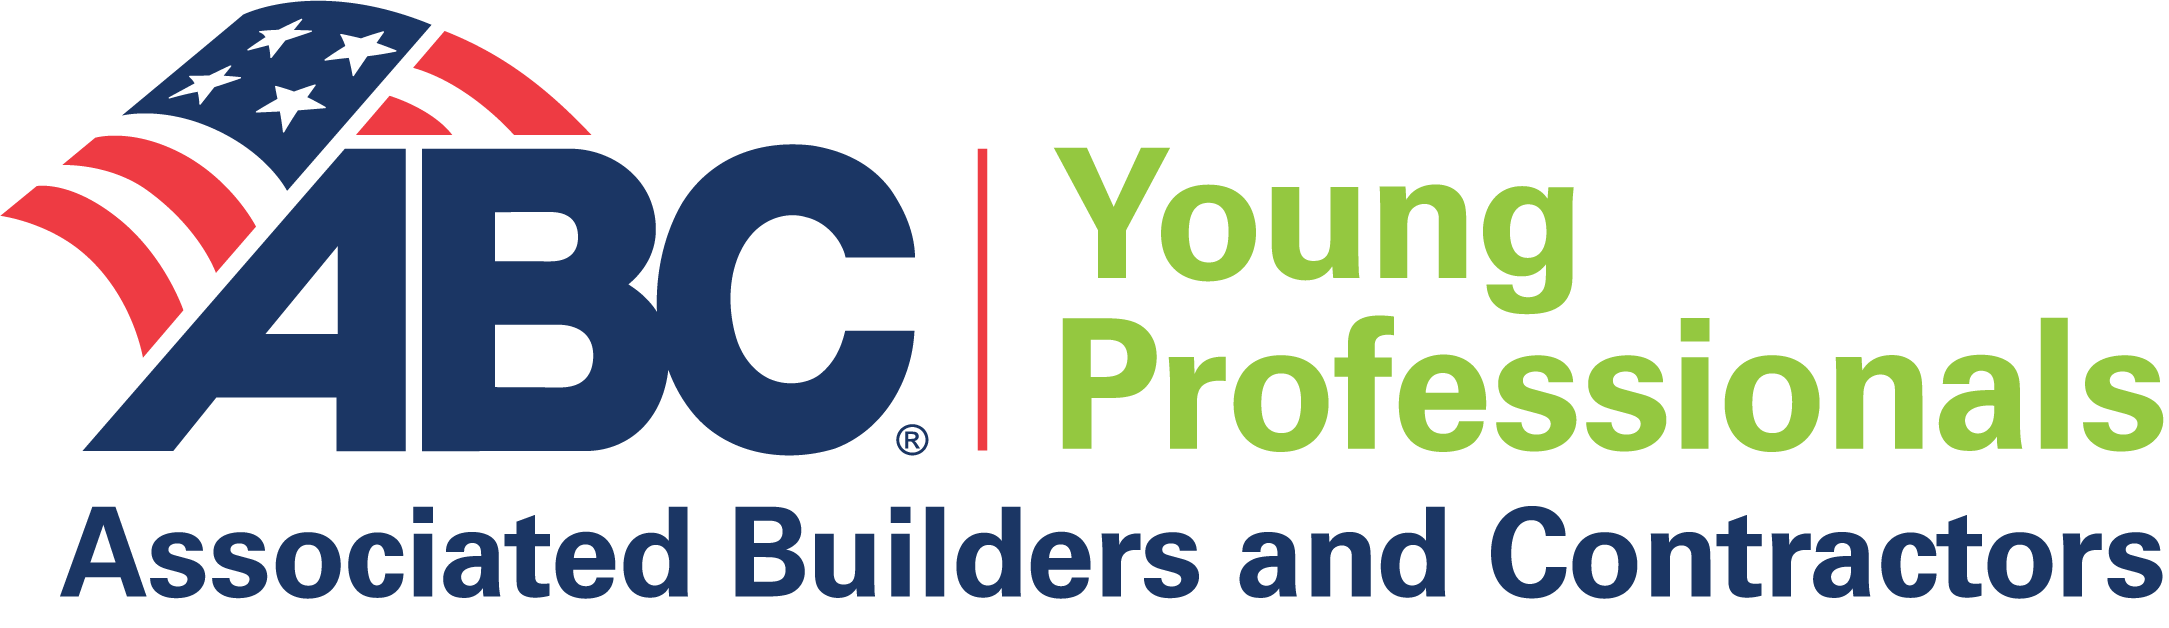 ABC Young Professionals